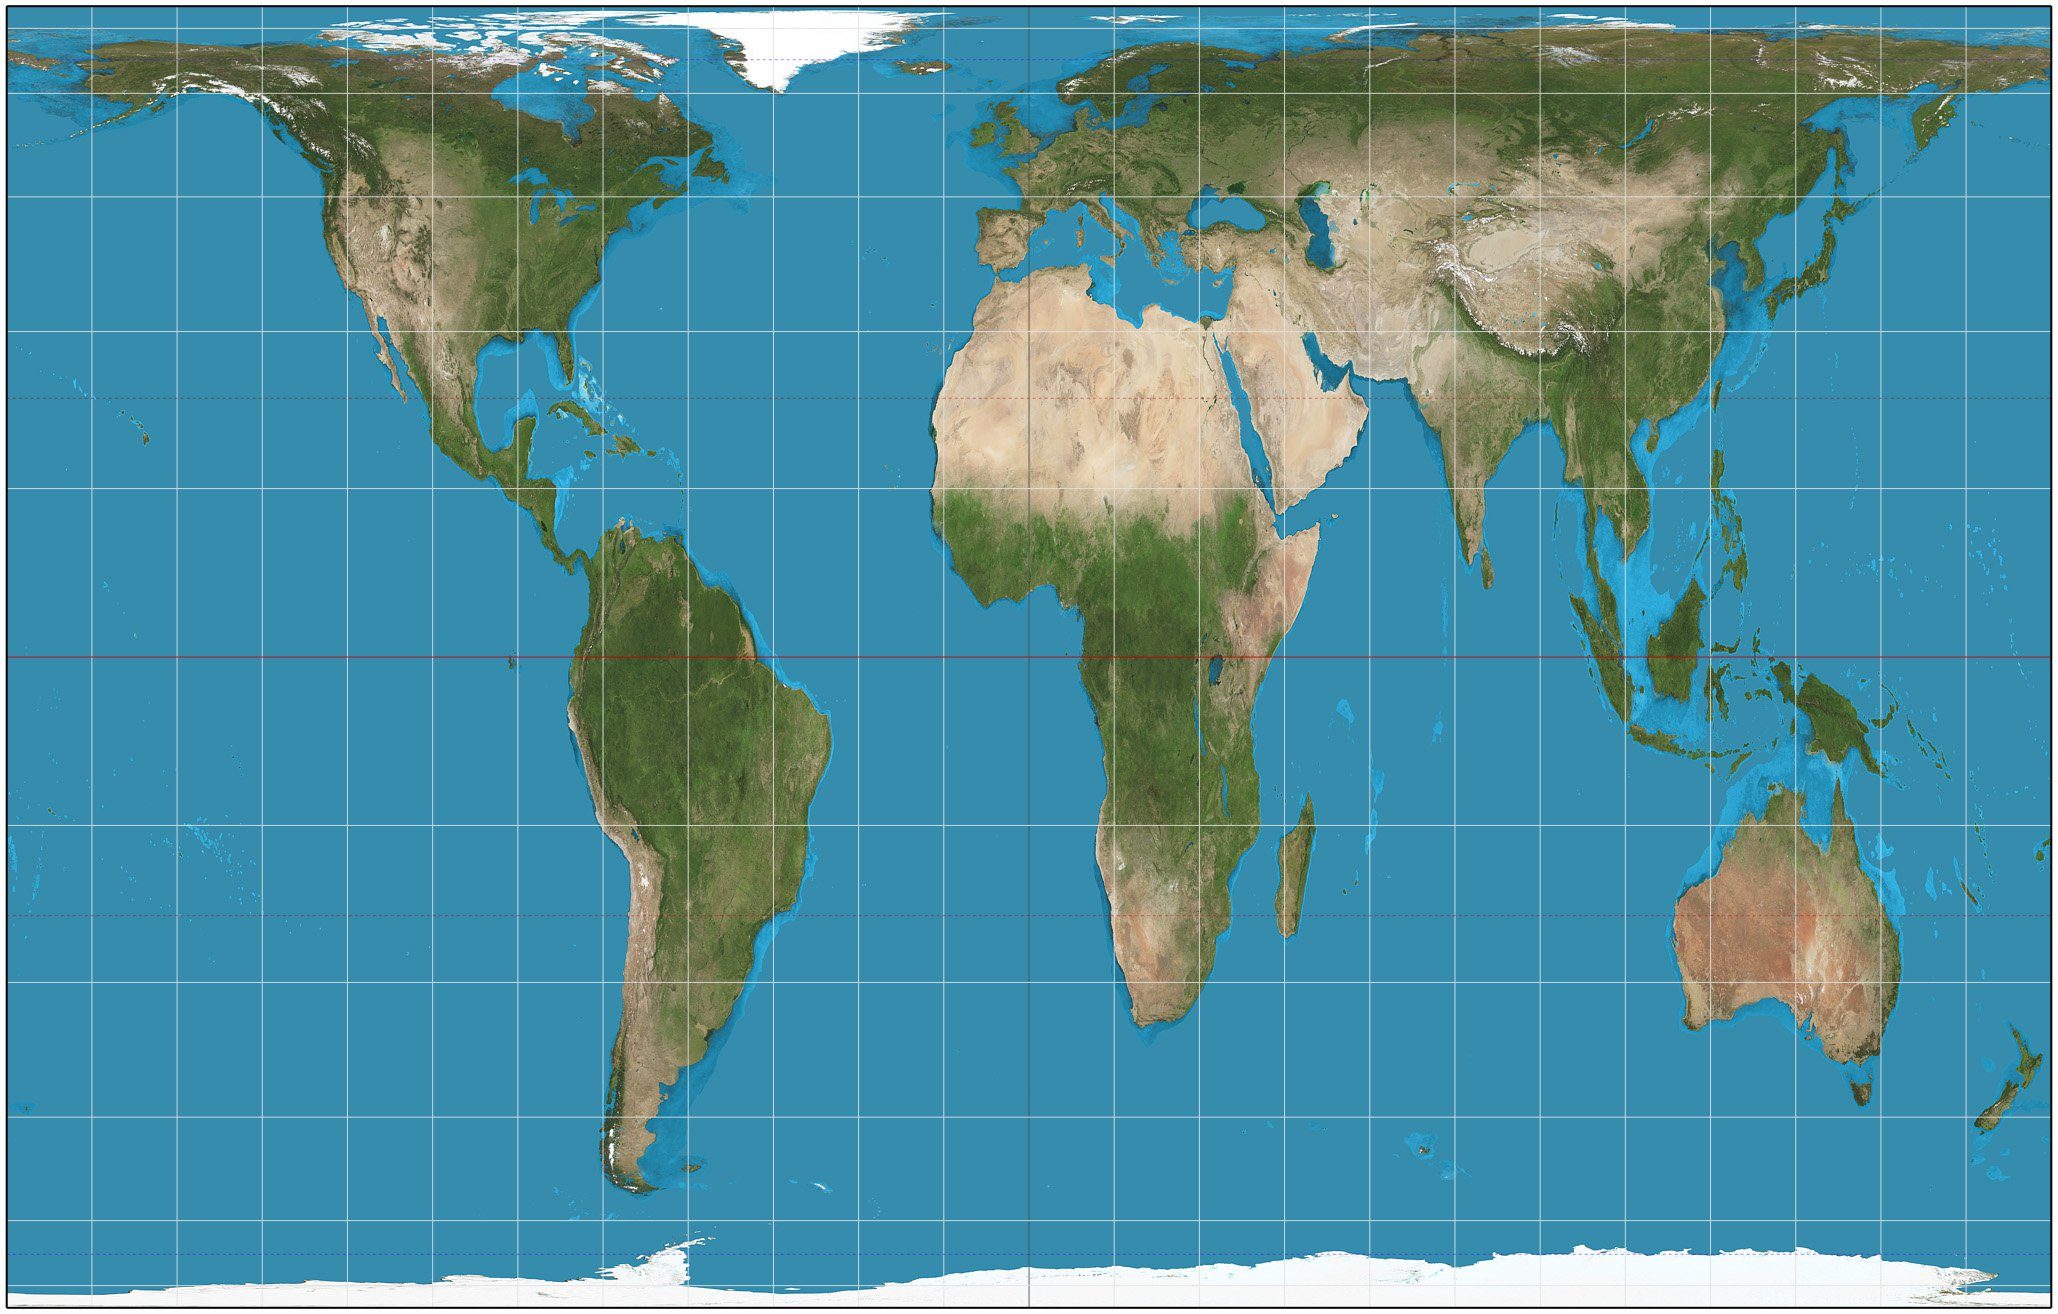 And the Gall-Peters Projection